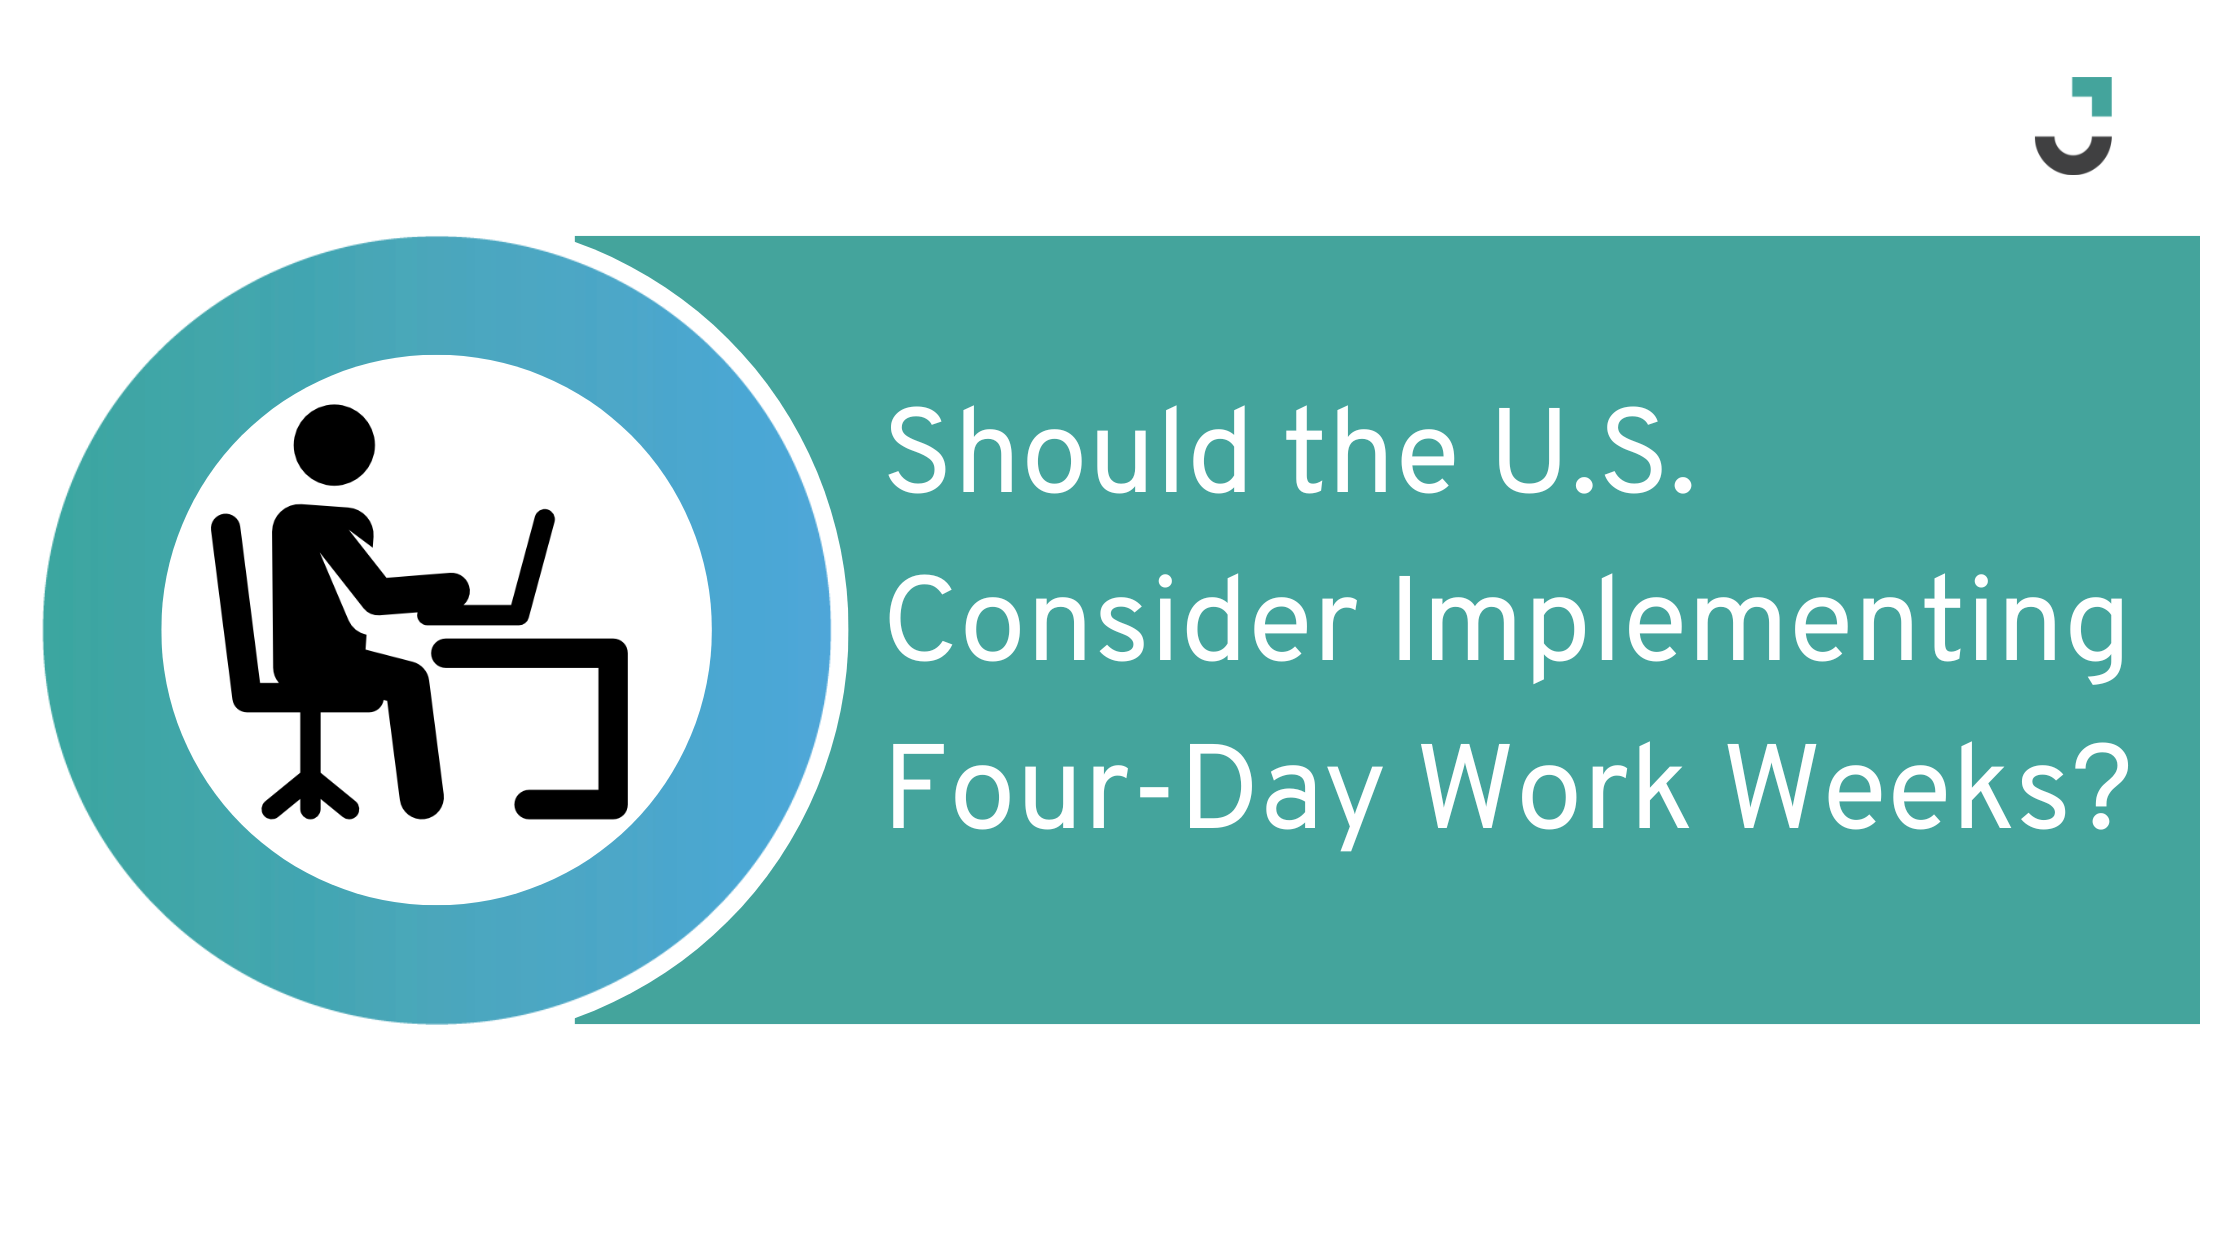 Should the U.S. Consider Implementing Four-Day Work Weeks?